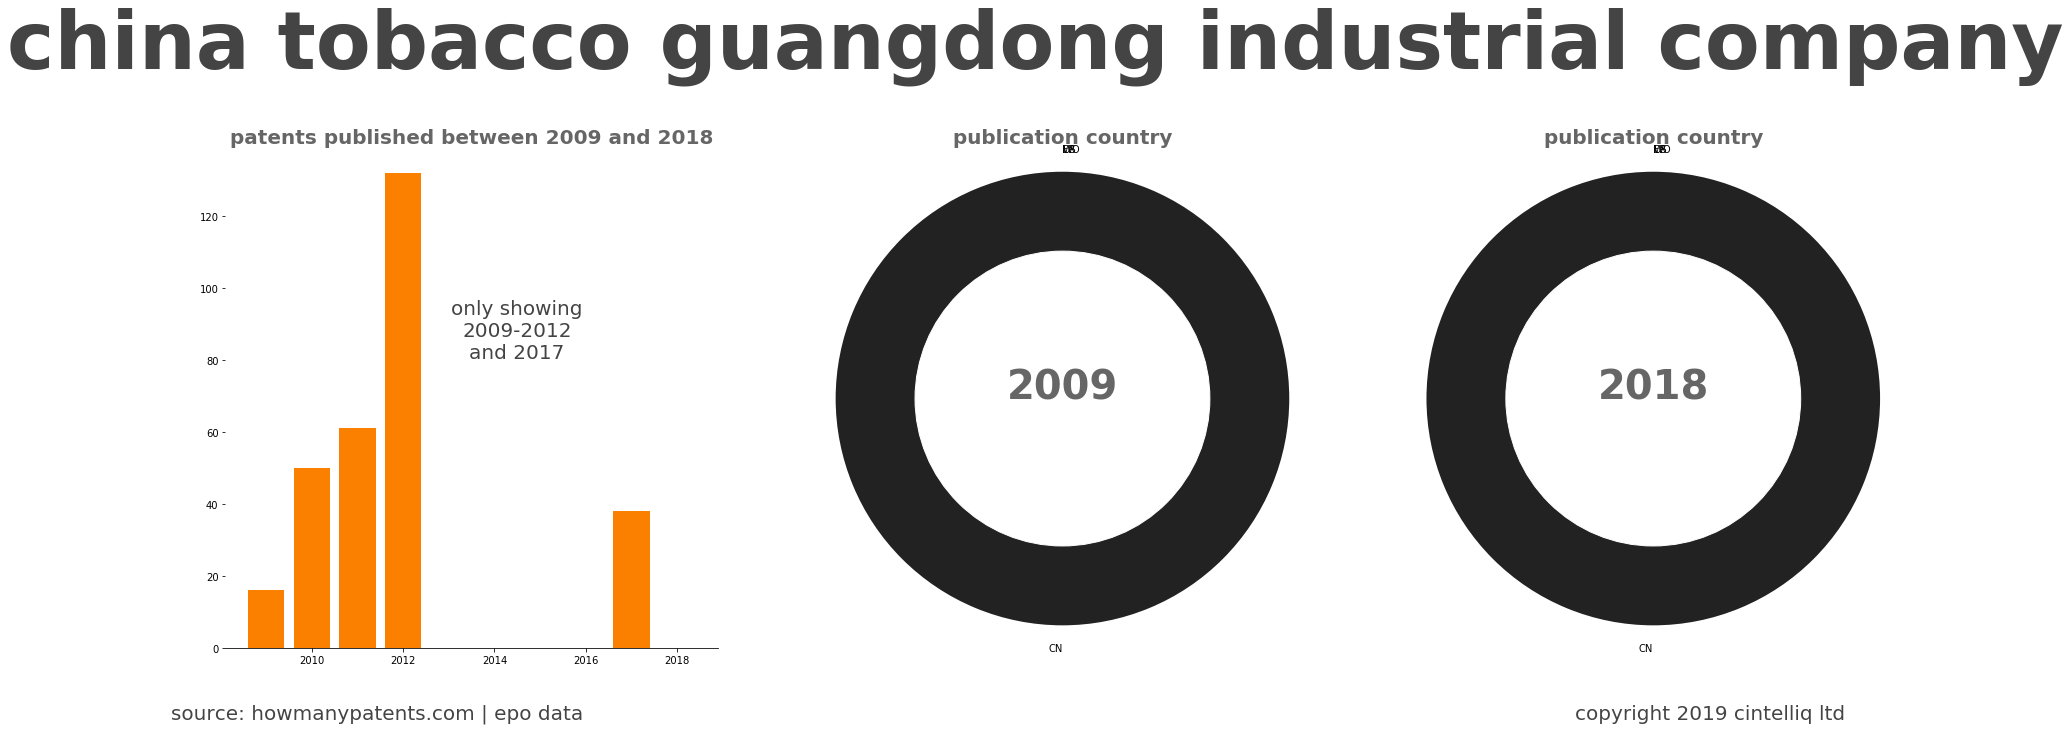 summary of patents for China Tobacco Guangdong Industrial Company